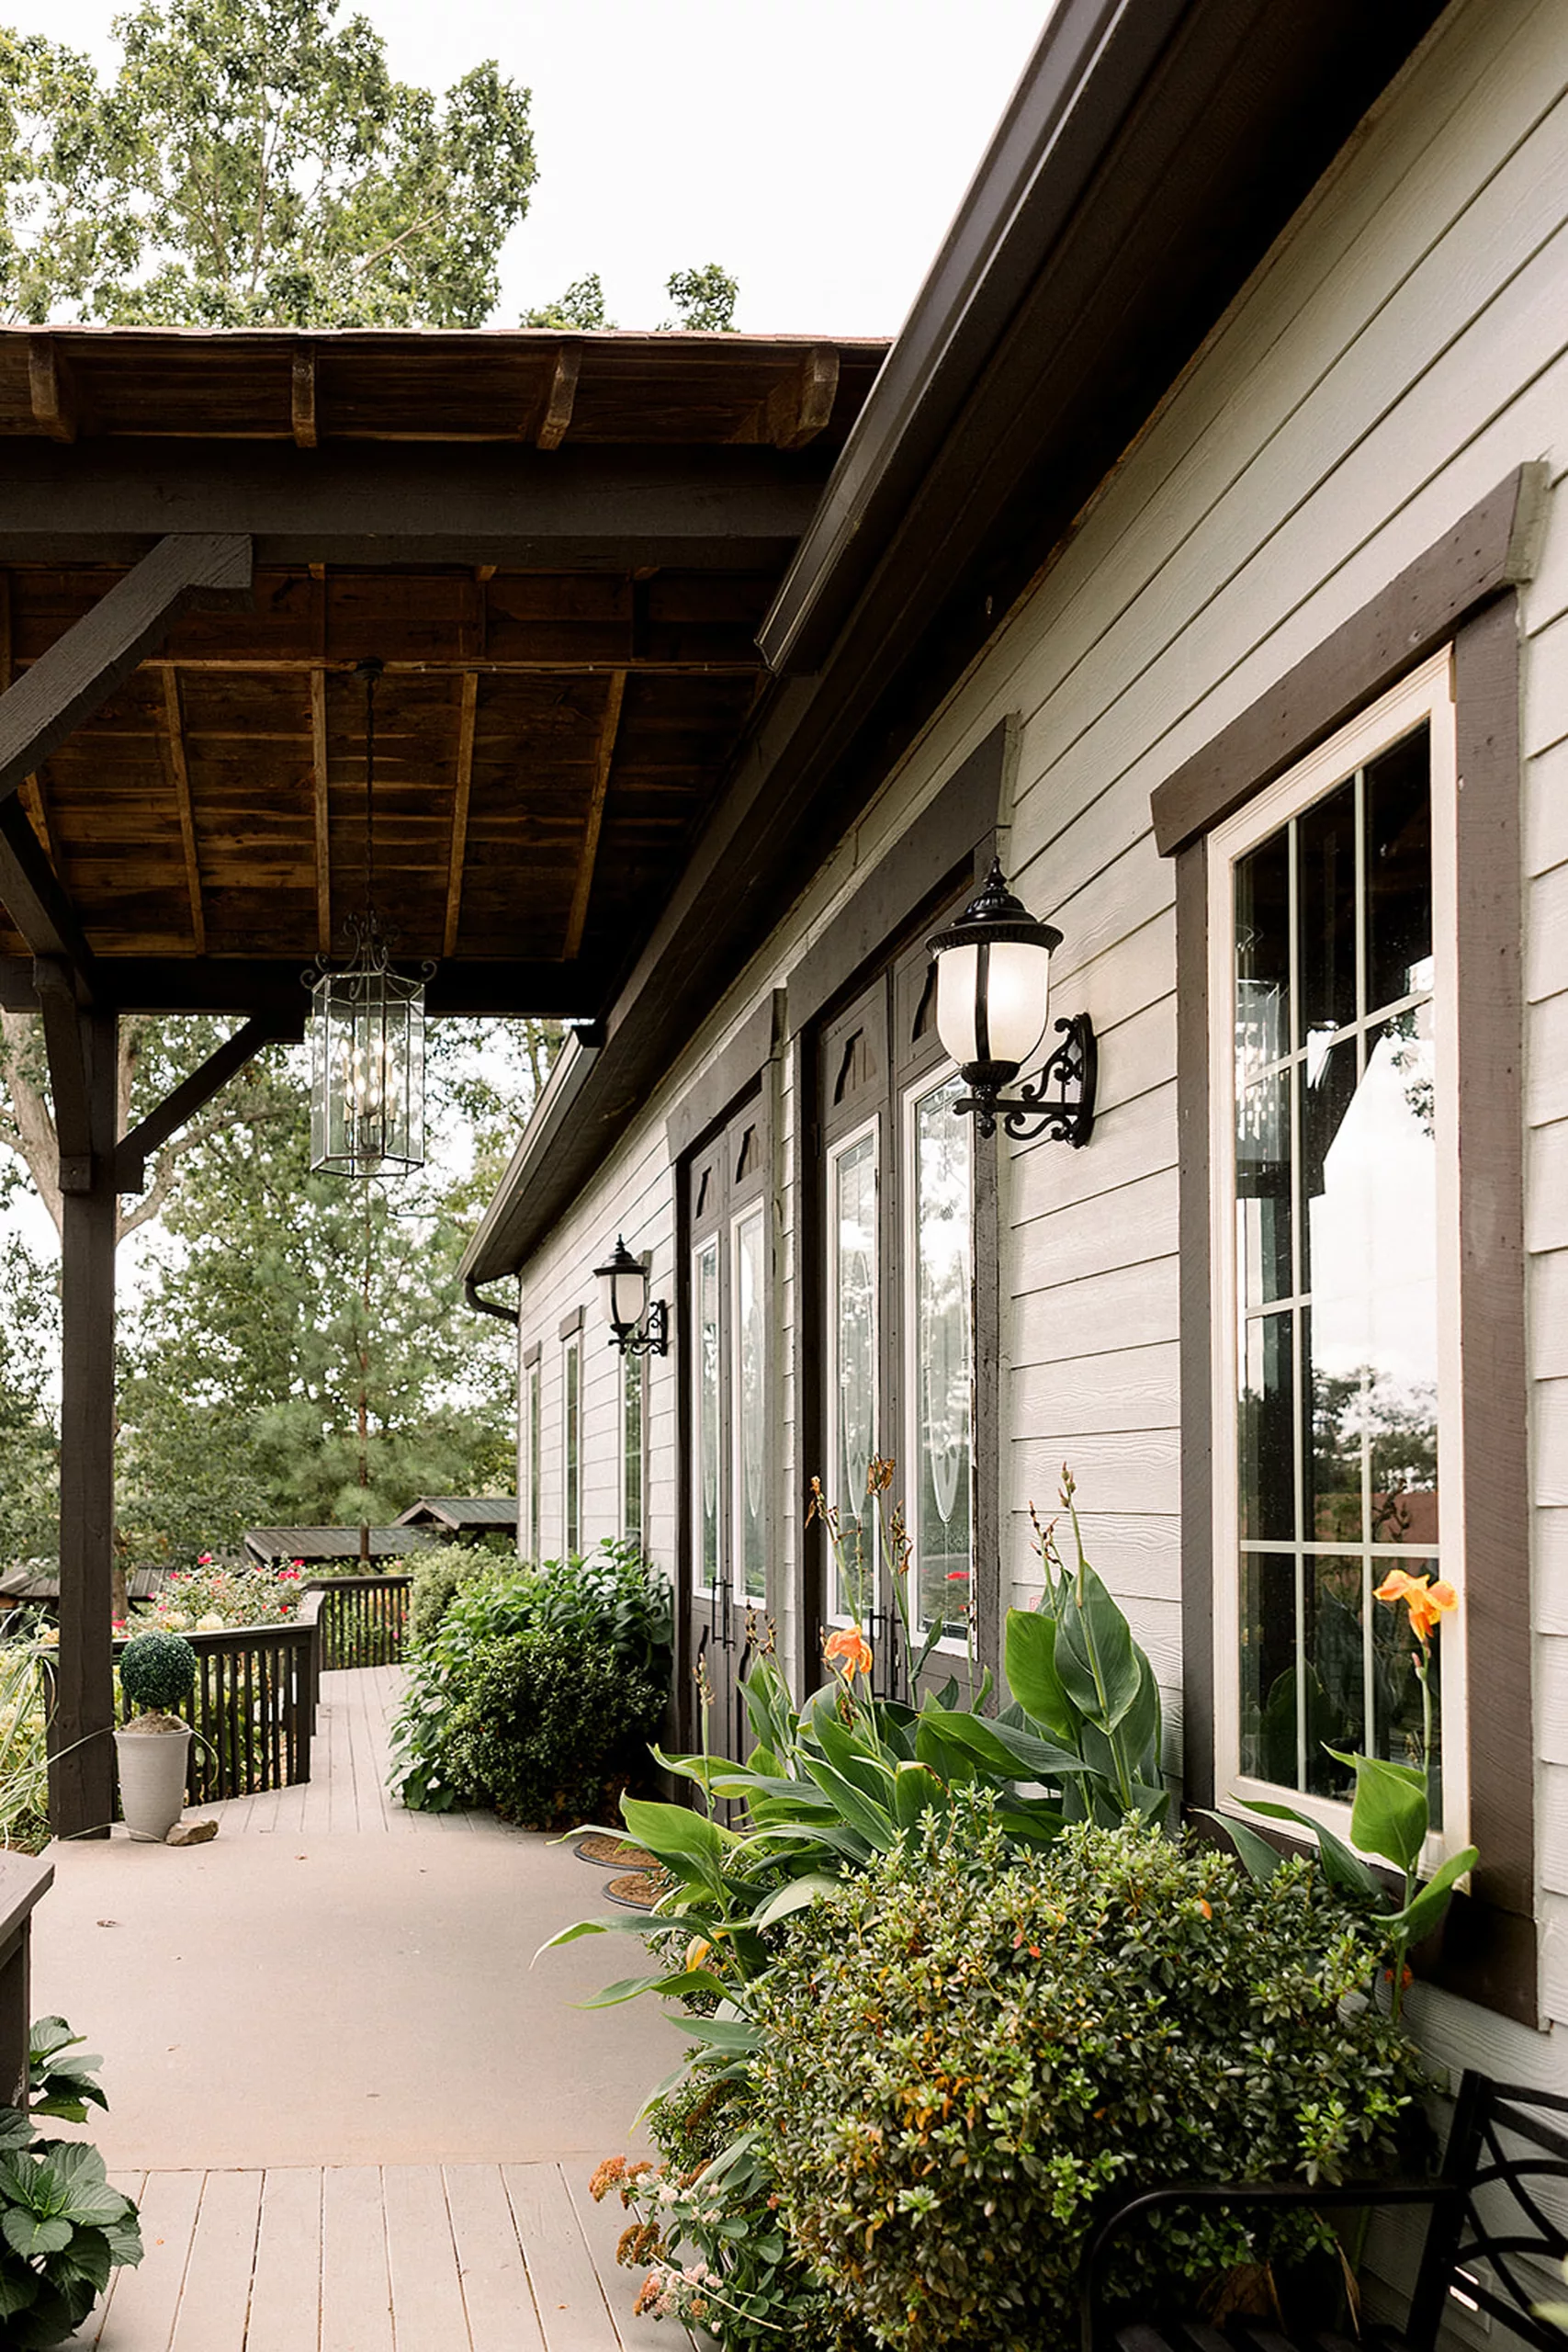 Details of the porch of the bridal suite at the White Oaks Vineyard wedding venue